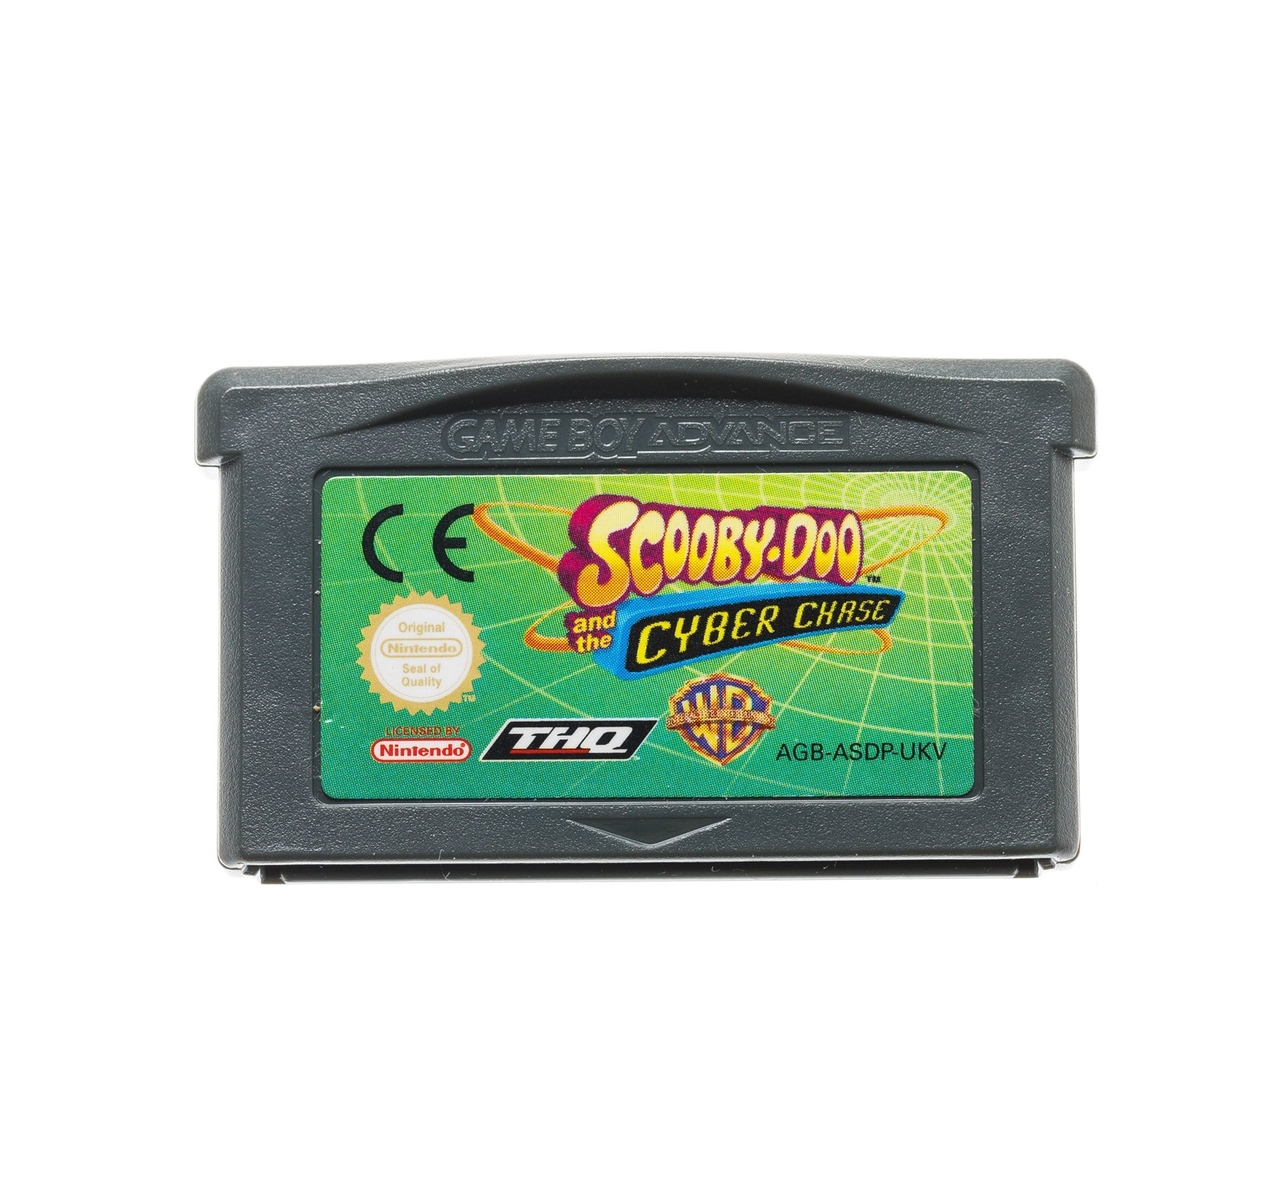 Scooby-Doo Cyber Chase | Gameboy Advance Games | RetroNintendoKopen.nl